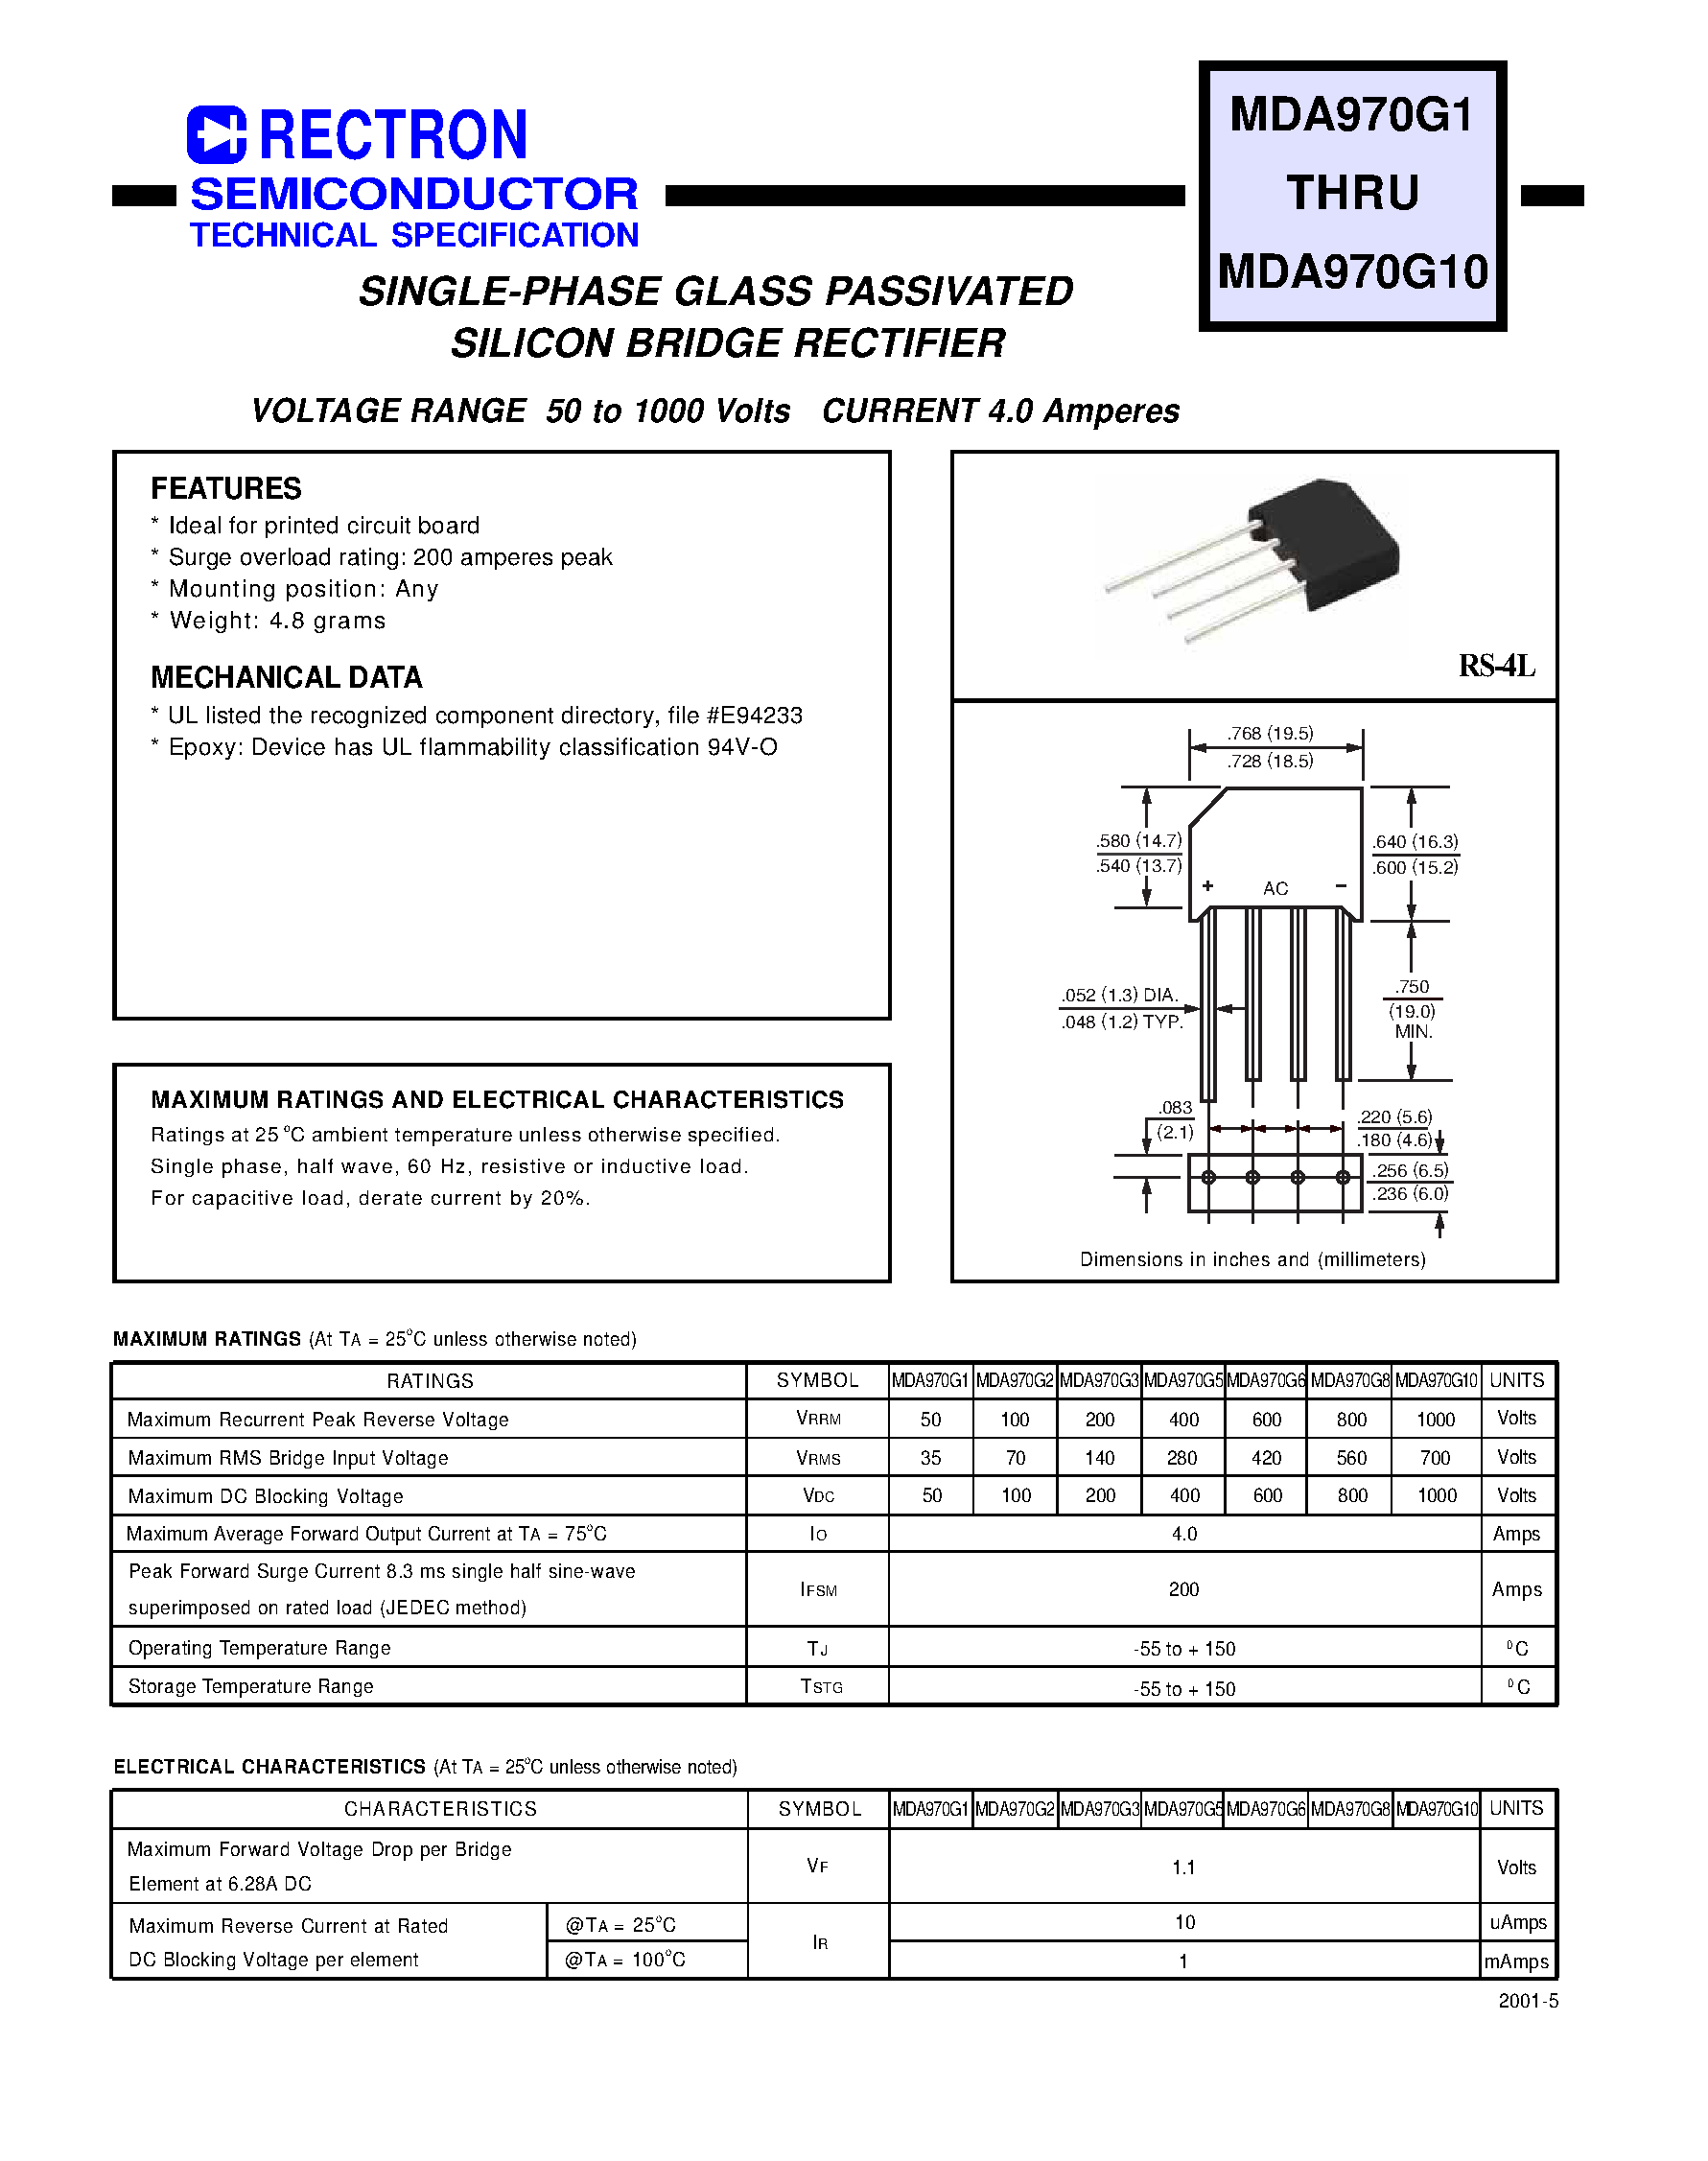 Datasheet MDA970G1 - SINGLE-PHASE GLASS PASSIVATED SILICON BRIDGE RECTIFIER (VOLTAGE RANGE 50 to 1000 Volts CURRENT 4.0 Amperes) page 1